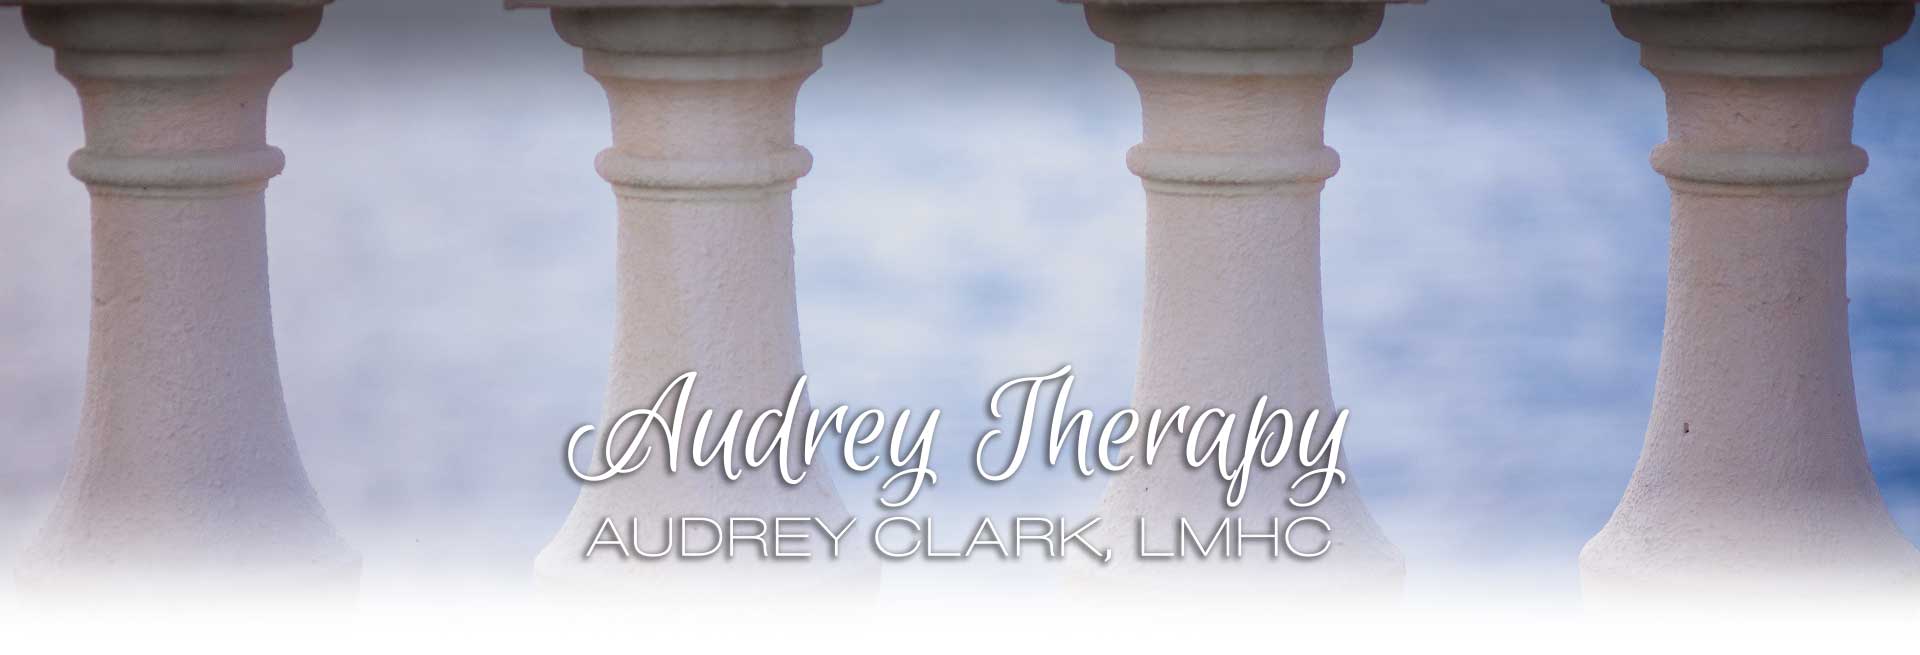 South Tampa Individual Counseling by Audrey Clark, LMHC